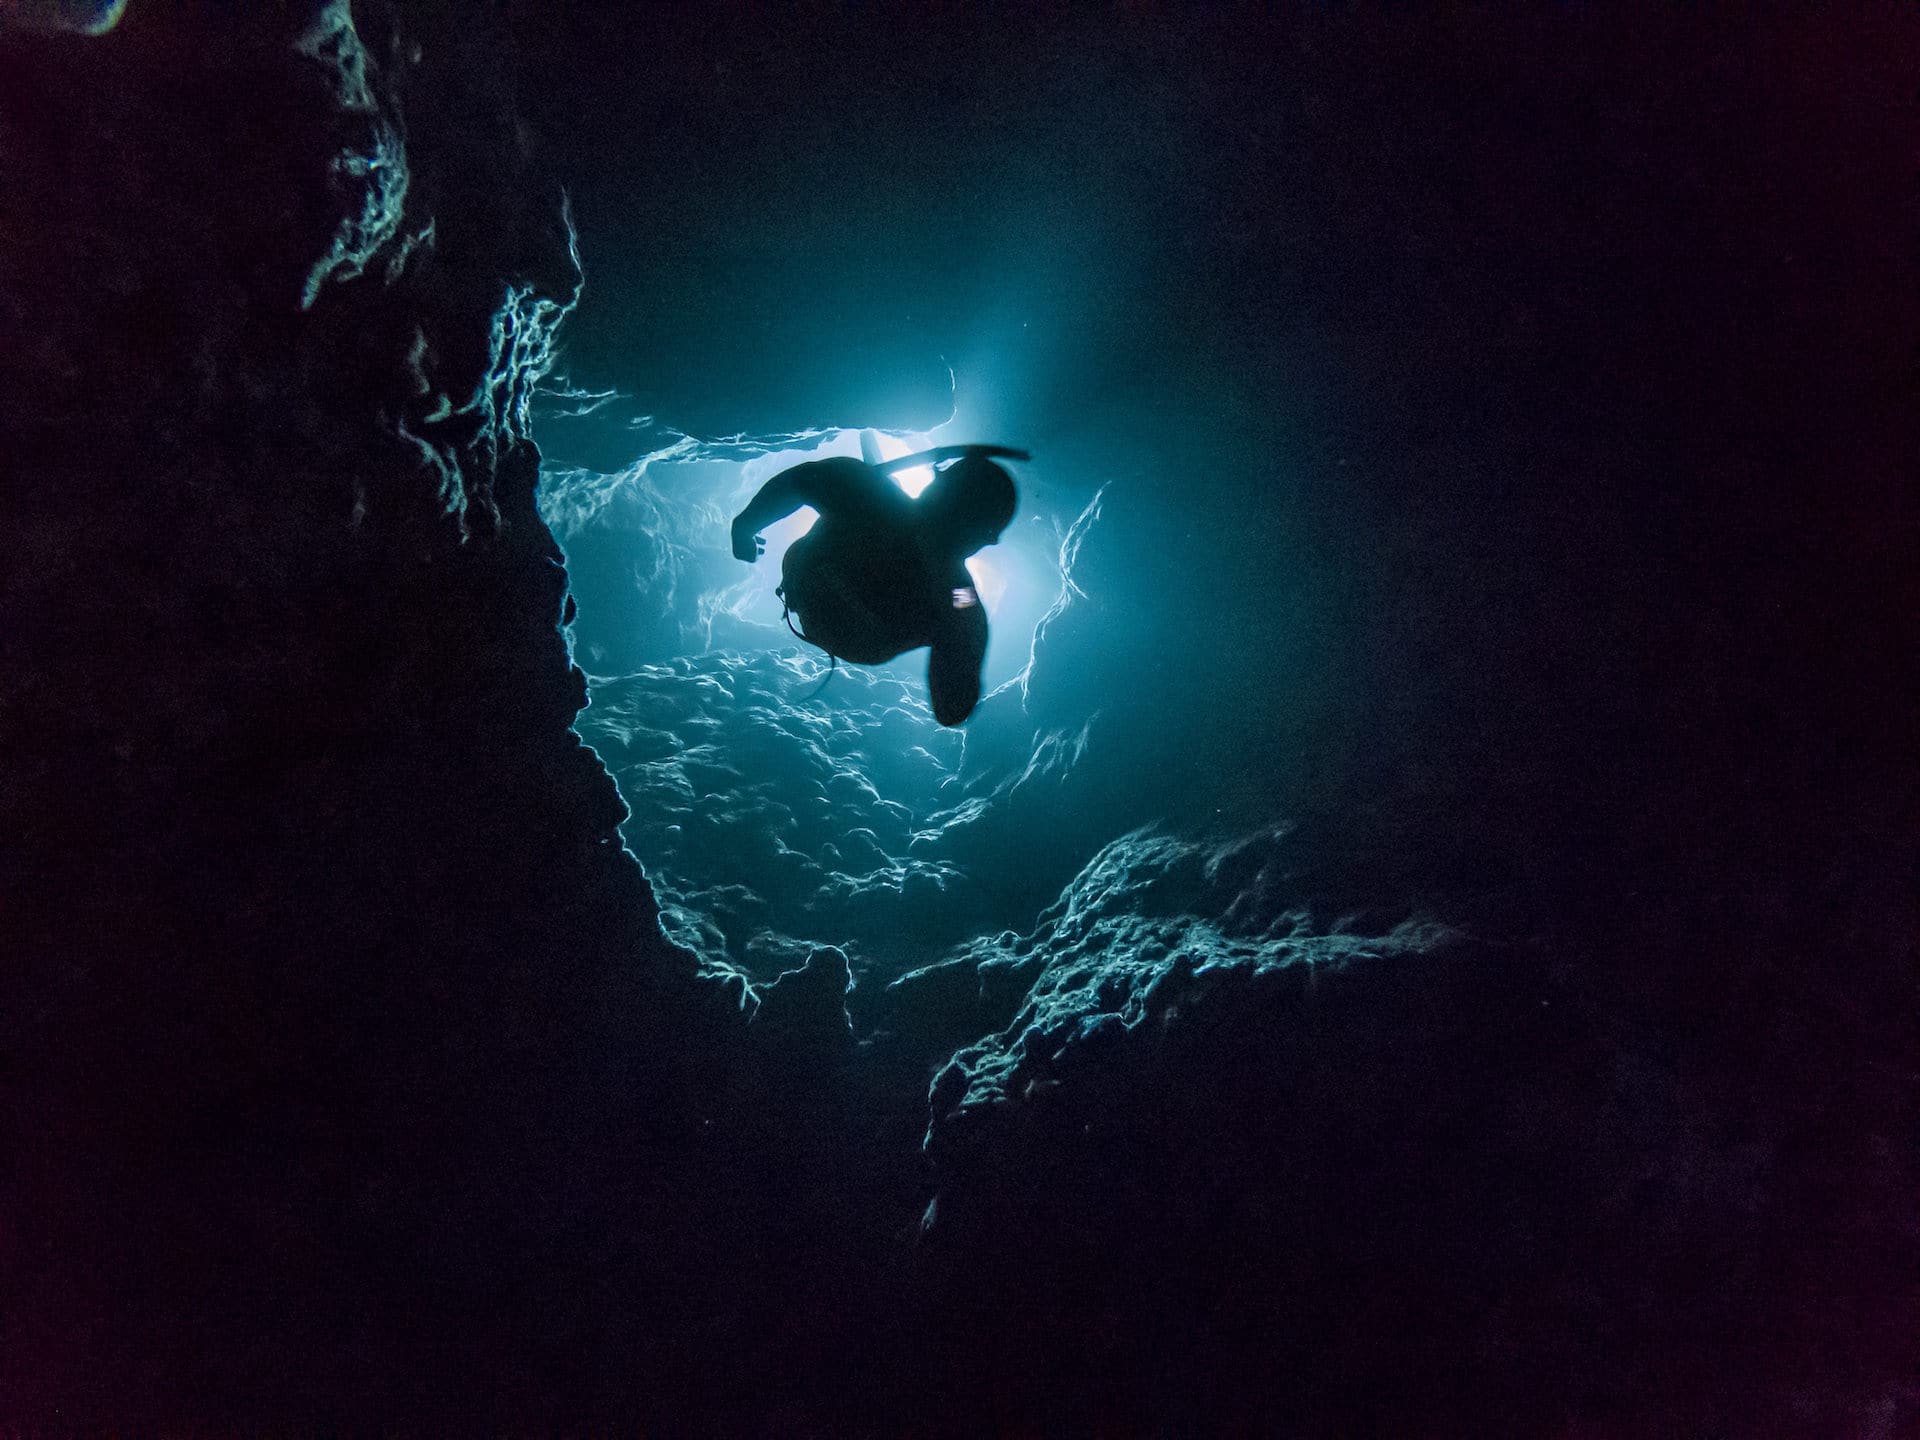 Freediving with a light at night